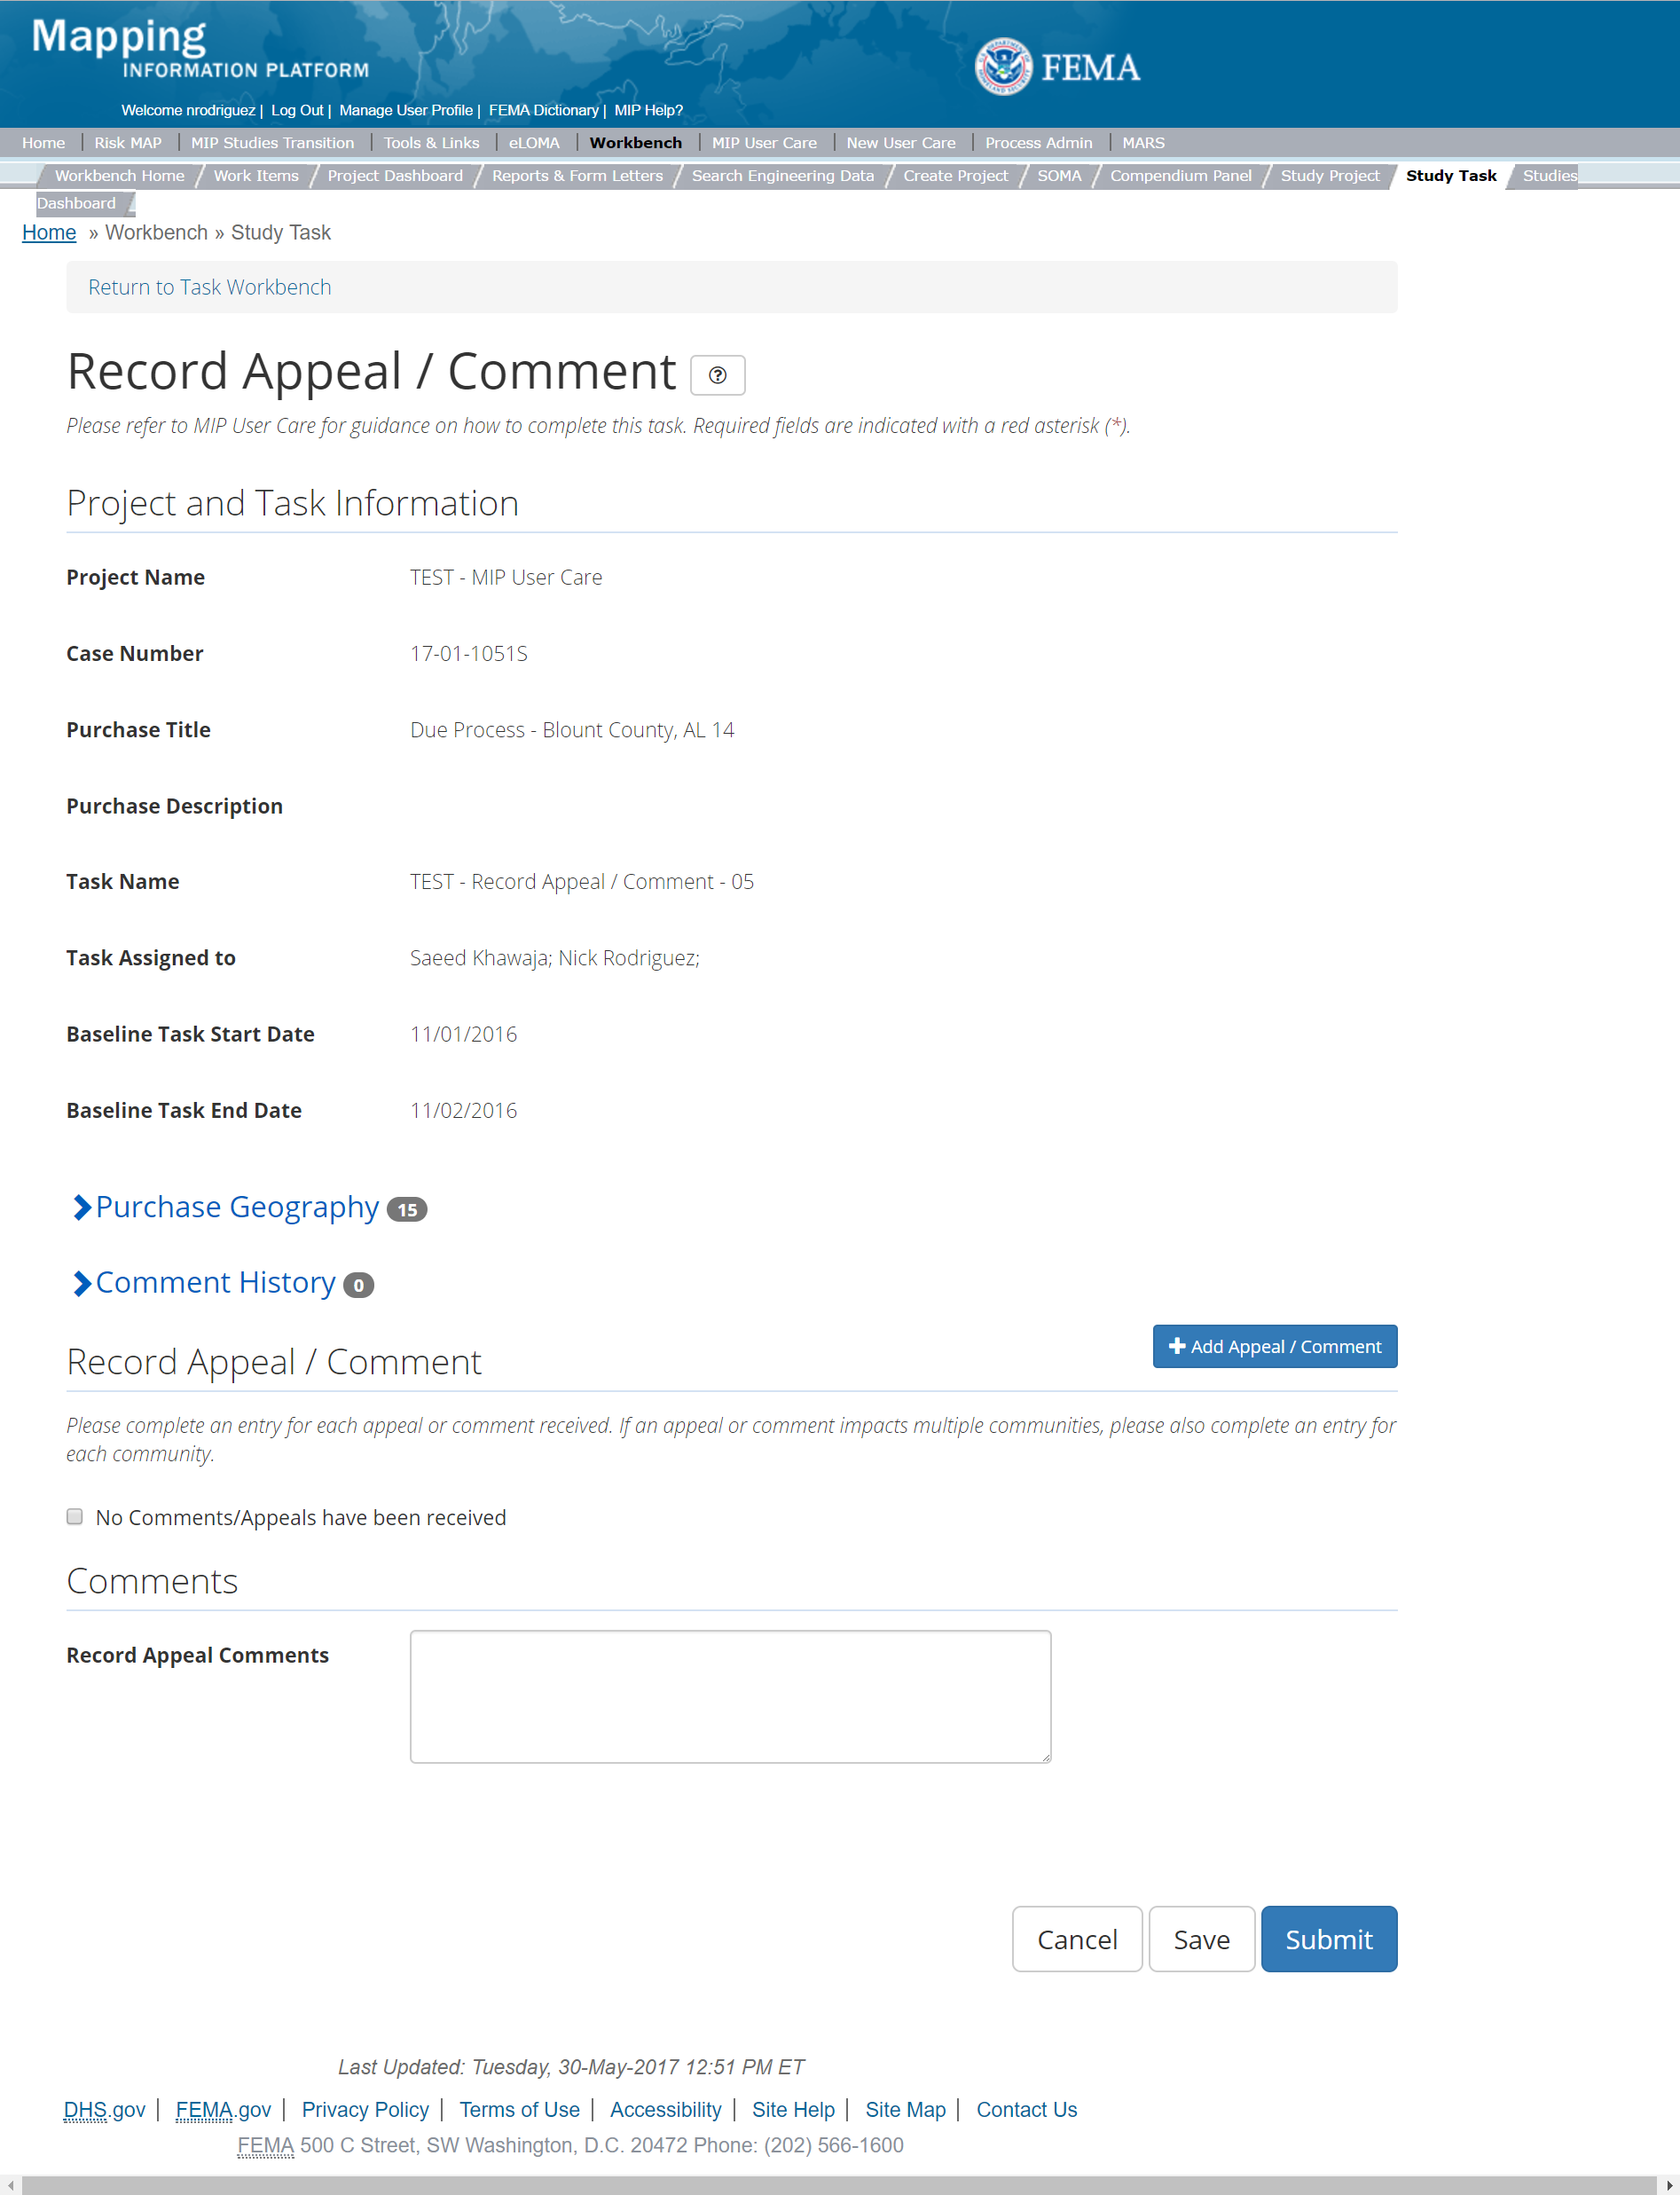 Record Appeal/Comment Task